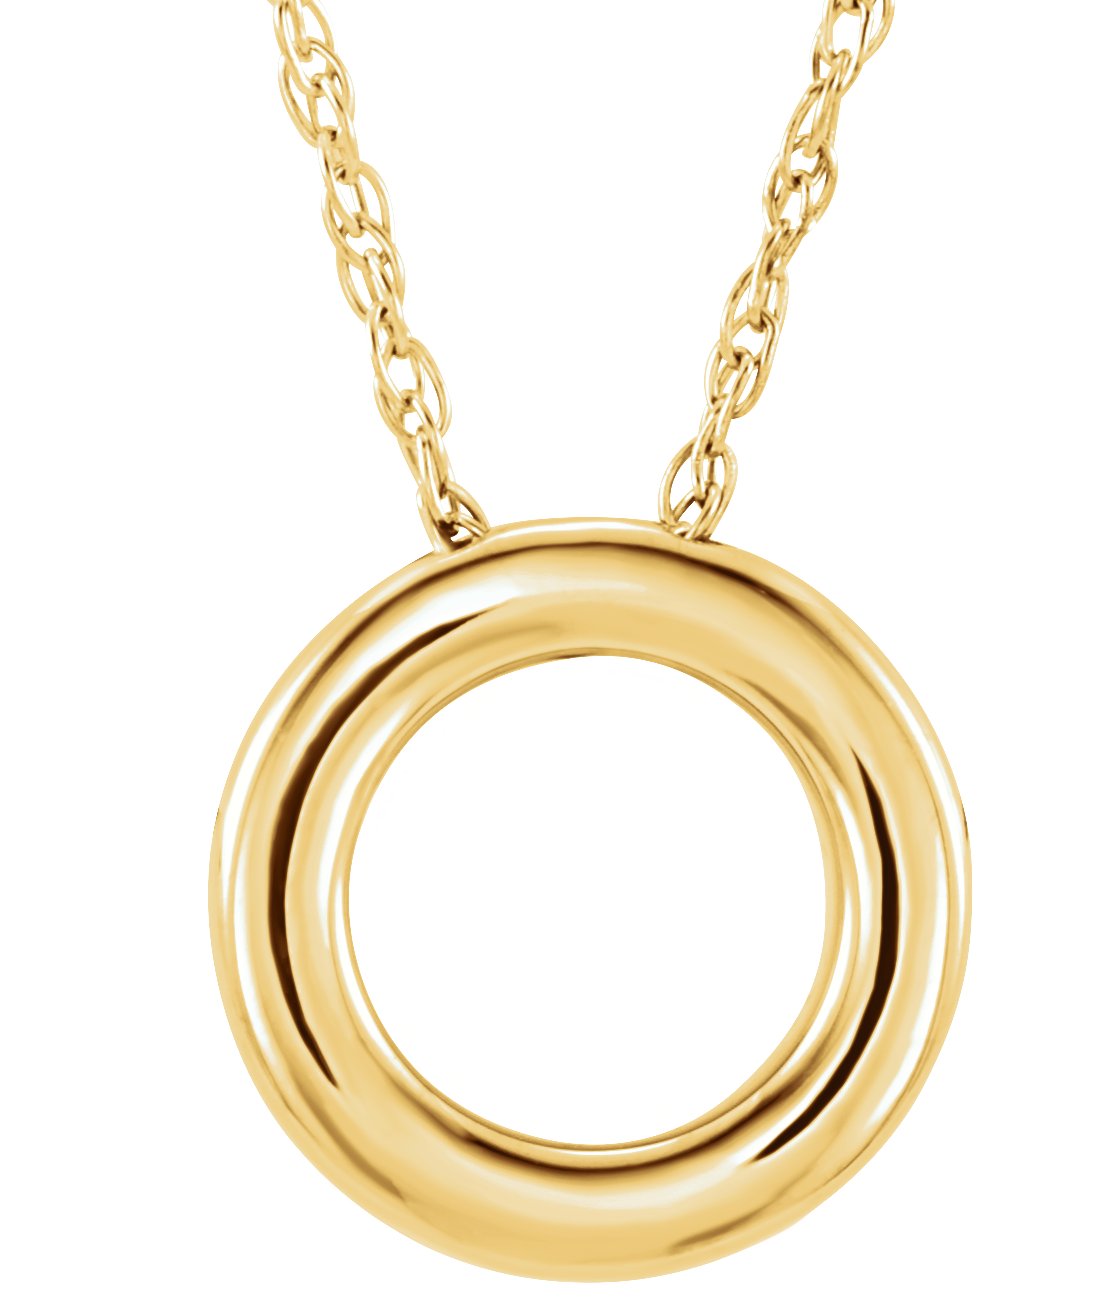 14K Yellow 13 mm Circle 18" Necklace